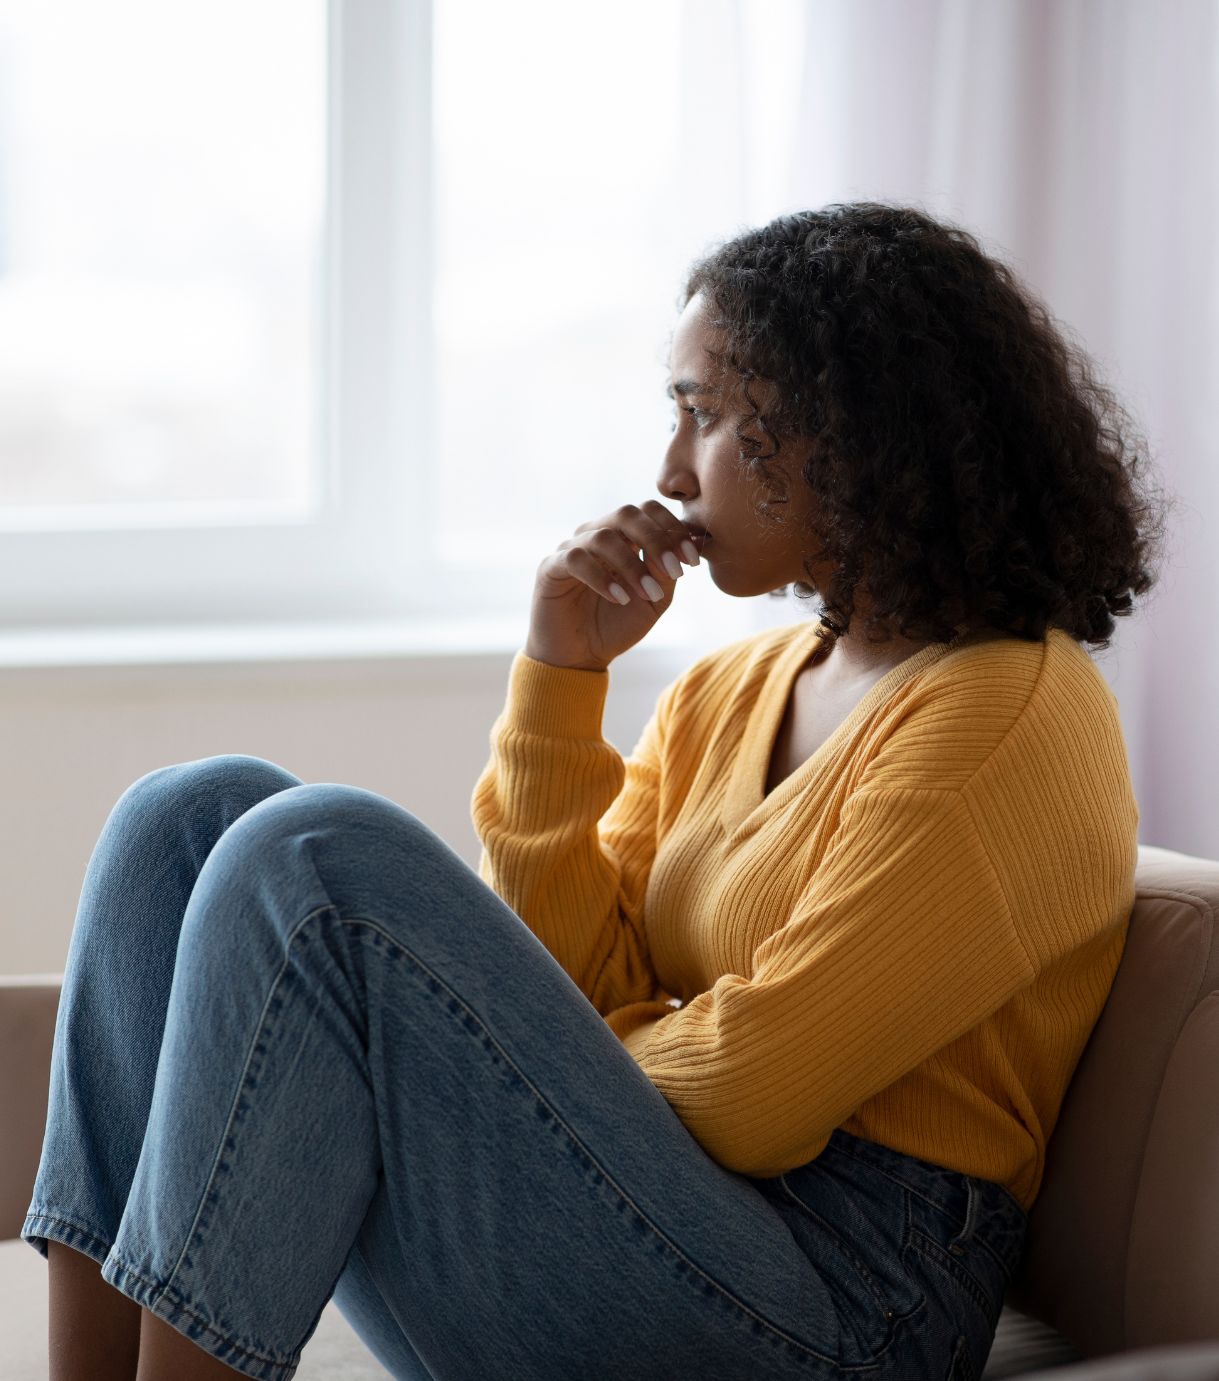 Image of a woman sitting on a couch with her hand to her mouth in thought. Discover how infidelity counseling in Miami, FL can help you and your partner begin healing after an affair. Work with a skilled therapist at Relationship Experts.